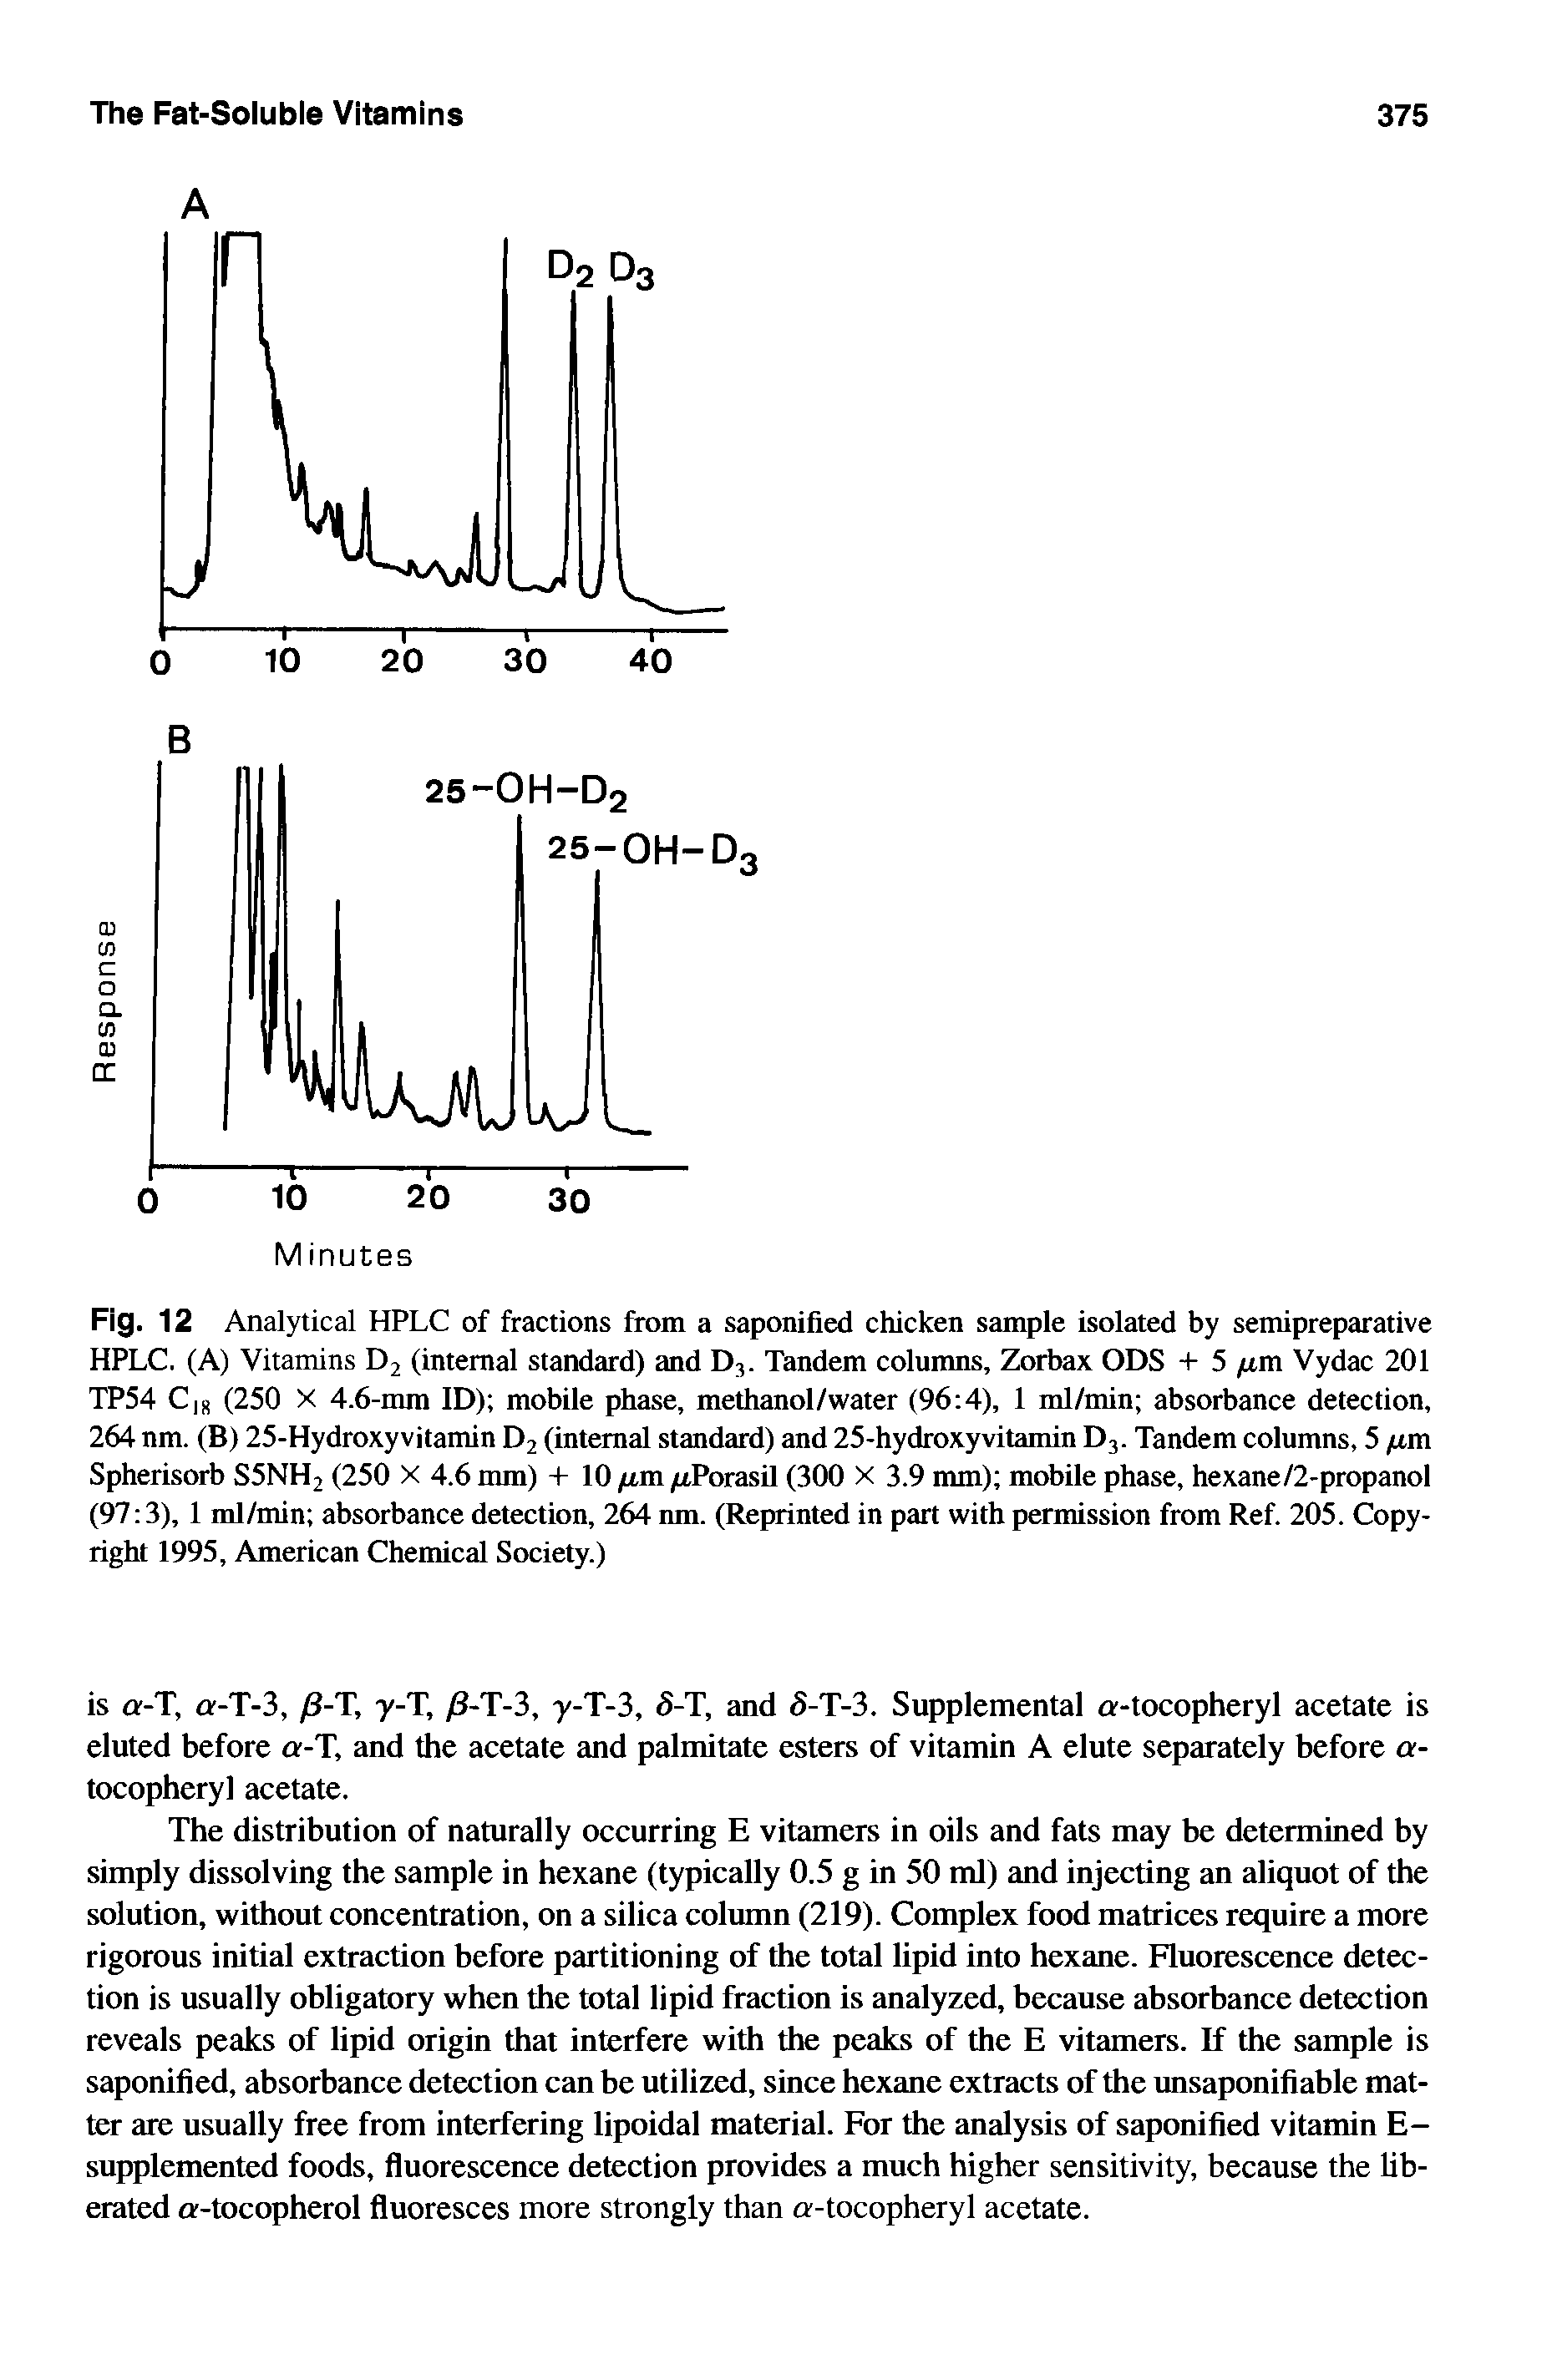 Fig. 12 Analytical HPLC of fractions from a saponified chicken sample isolated by semipreparative HPLC. (A) Vitamins D2 (internal standard) and D3. Tandem columns, Zorbax ODS + 5 /nm Vydac 201 TP54 Cl8 (250 X 4.6-mm ID) mobile phase, methanol/water (96 4), 1 ml/min absorbance detection, 264 nm. (B) 25-Hydroxyvitamin D2 (internal standard) and 25-hydroxyvitamin D3. Tandem columns, 5 /nm Spherisorb S5NH2 (250 X 4.6 mm) + 10 /nm /nPorasil (300 X 3.9 mm) mobile phase, hexane/2-propanol (97 3), 1 ml/min absorbance detection, 264 nm. (Reprinted in part with permission from Ref. 205. Copyright 1995, American Chemical Society.)...